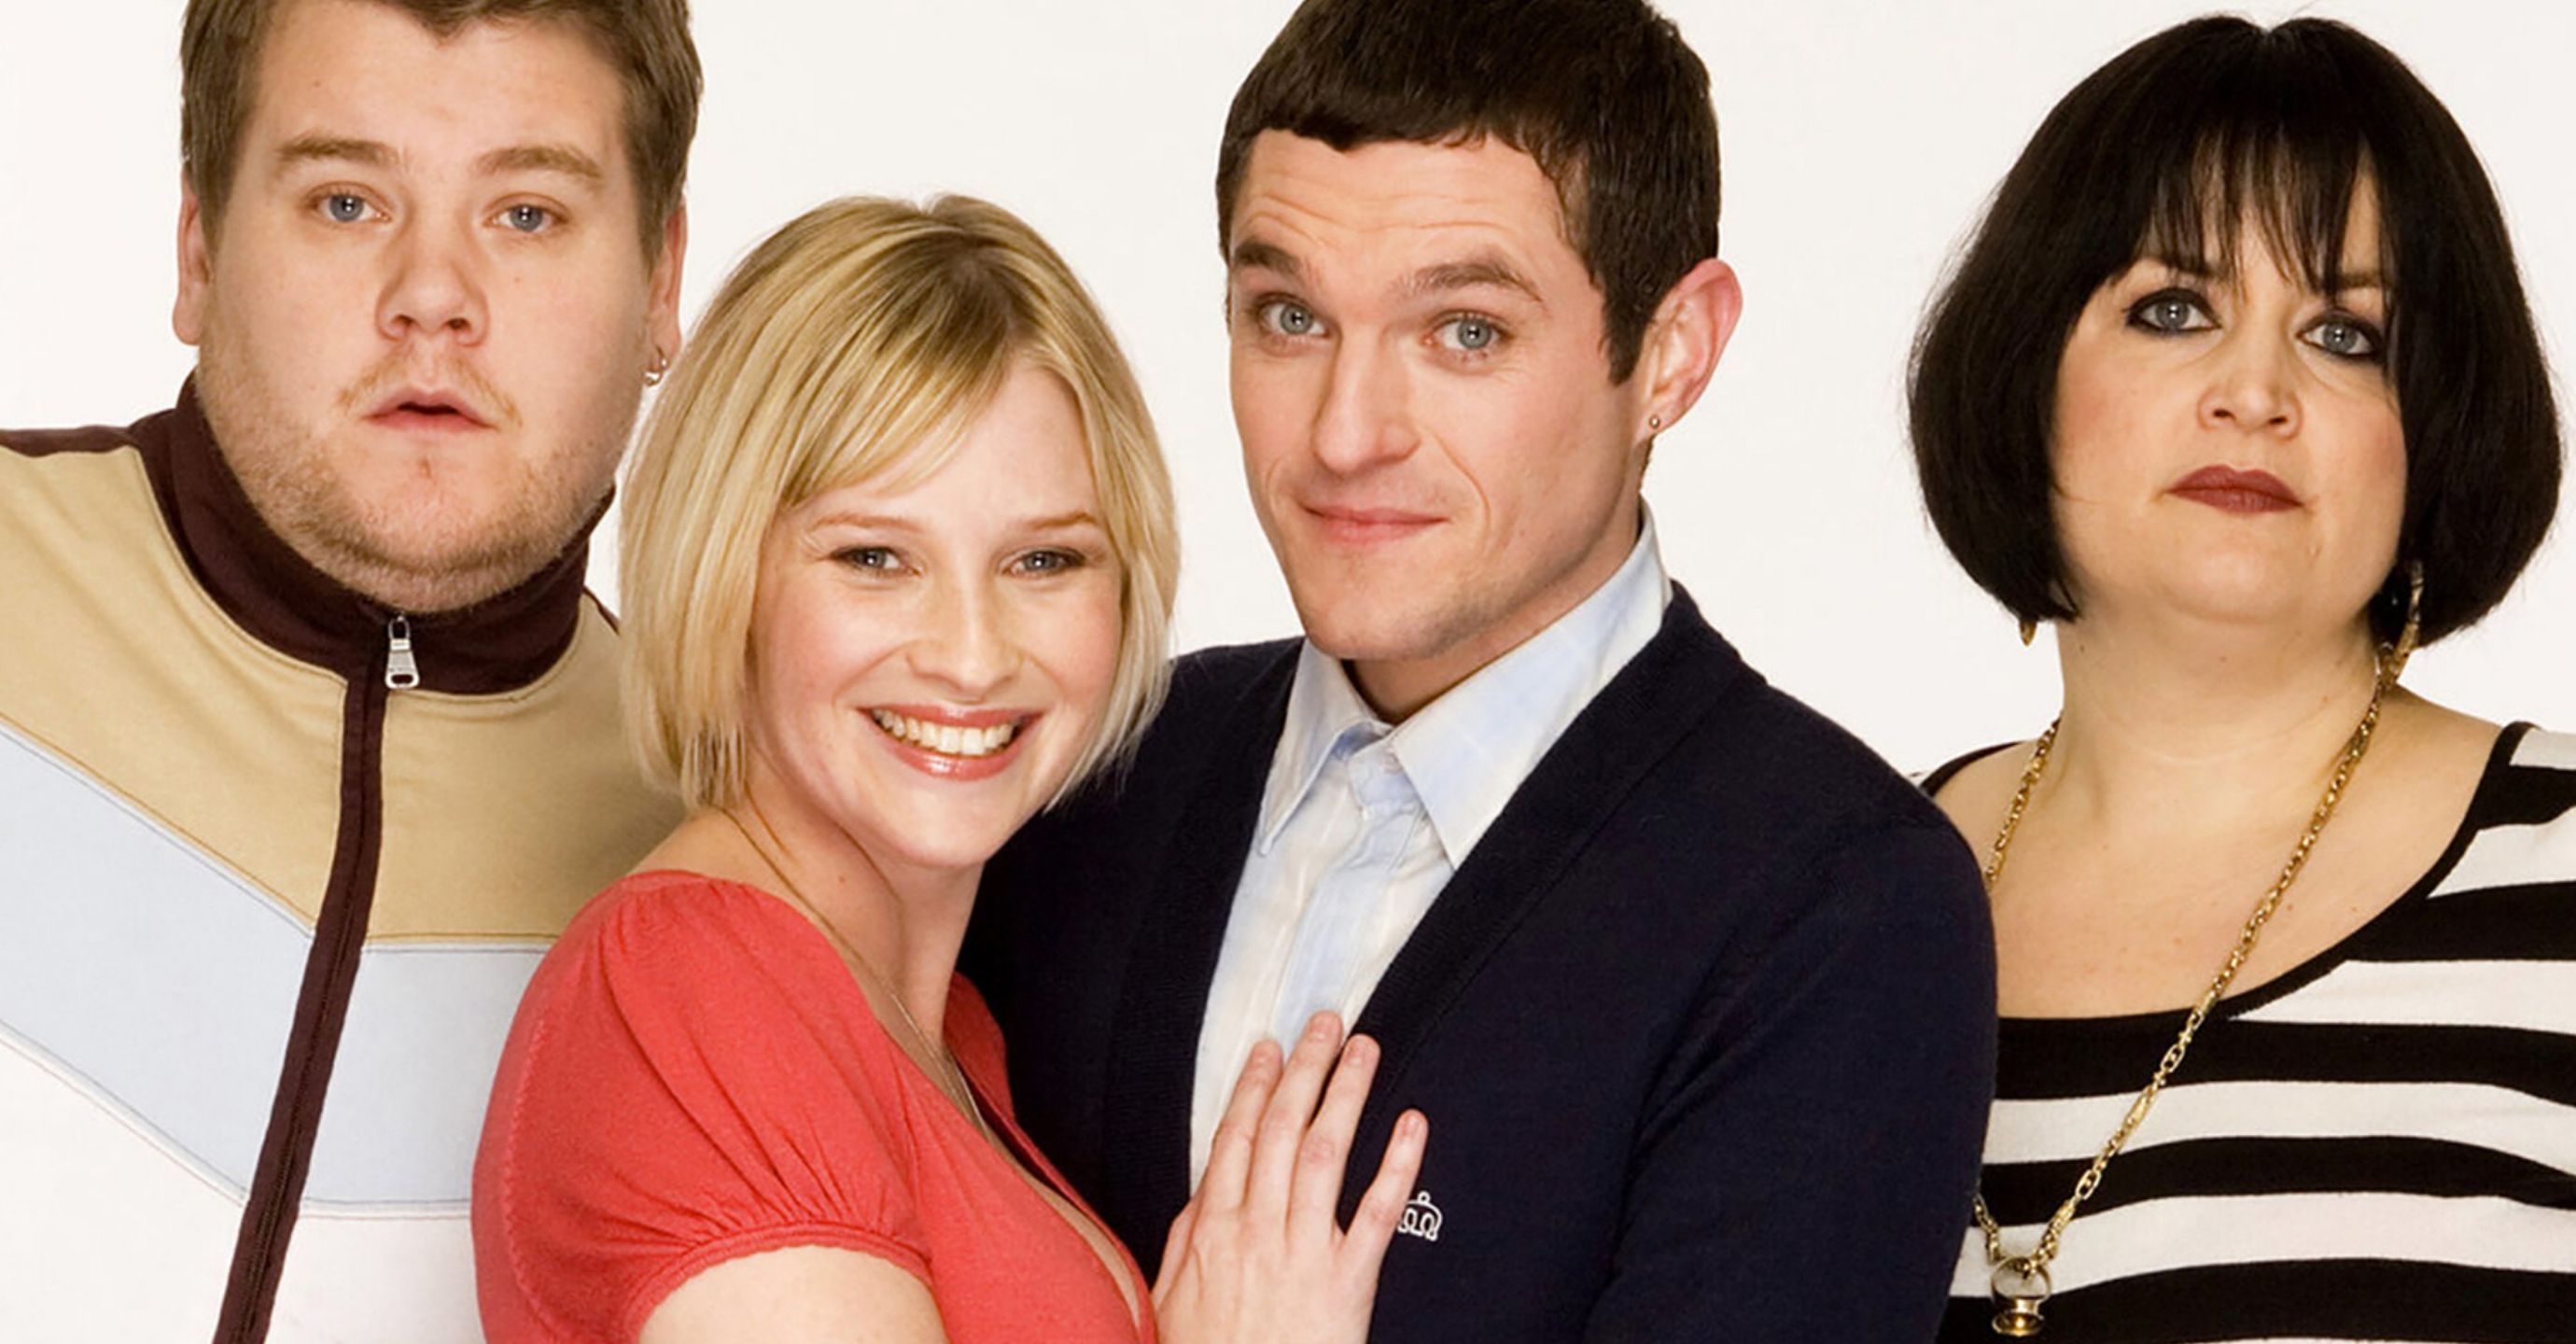 Cast of Gavin and Stacey against a white background